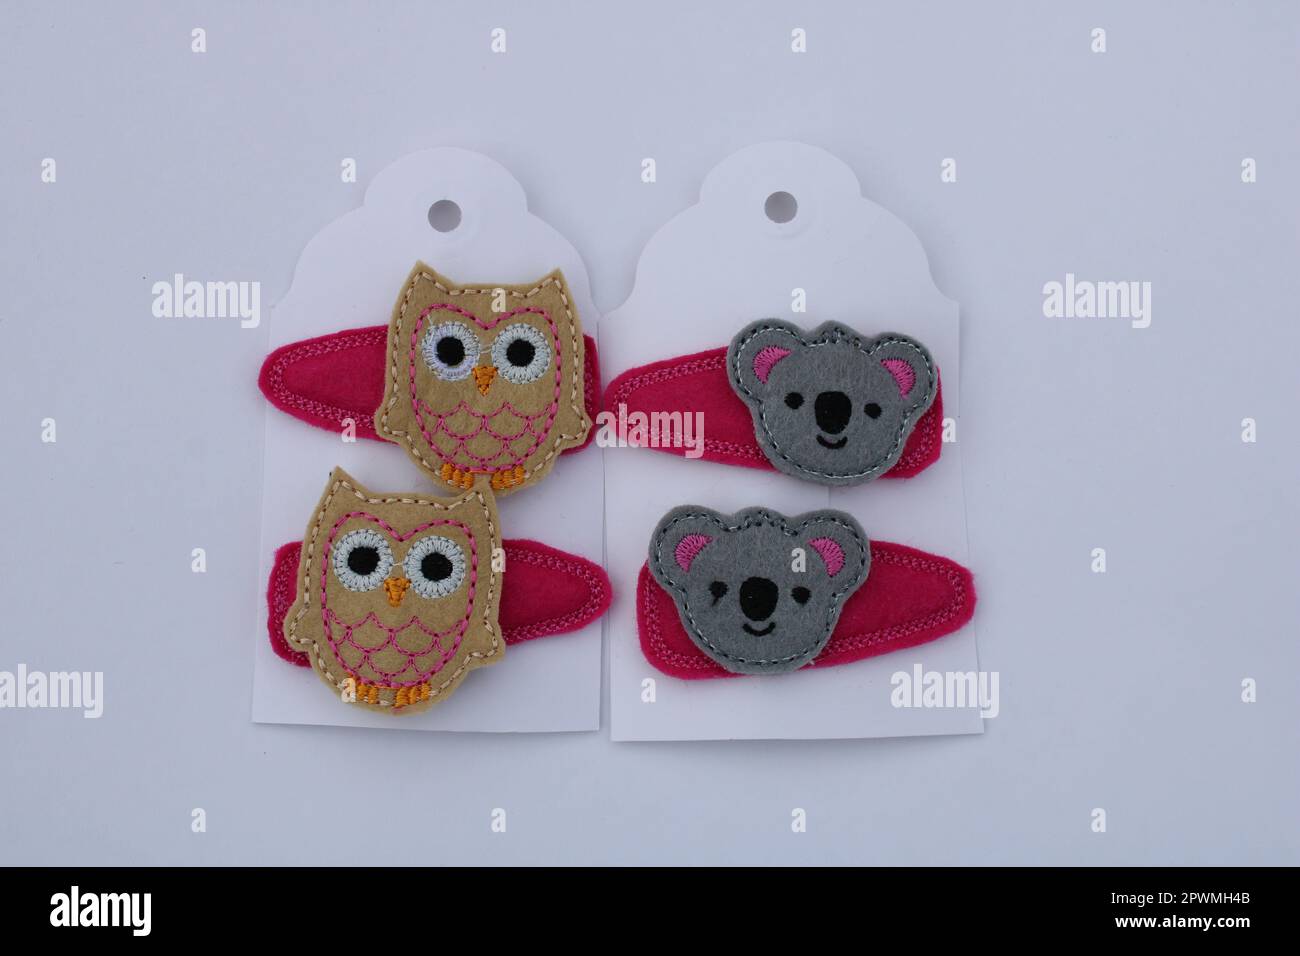 Home made embroidered animal hair clips of an Owl and Koala bear Stock Photo